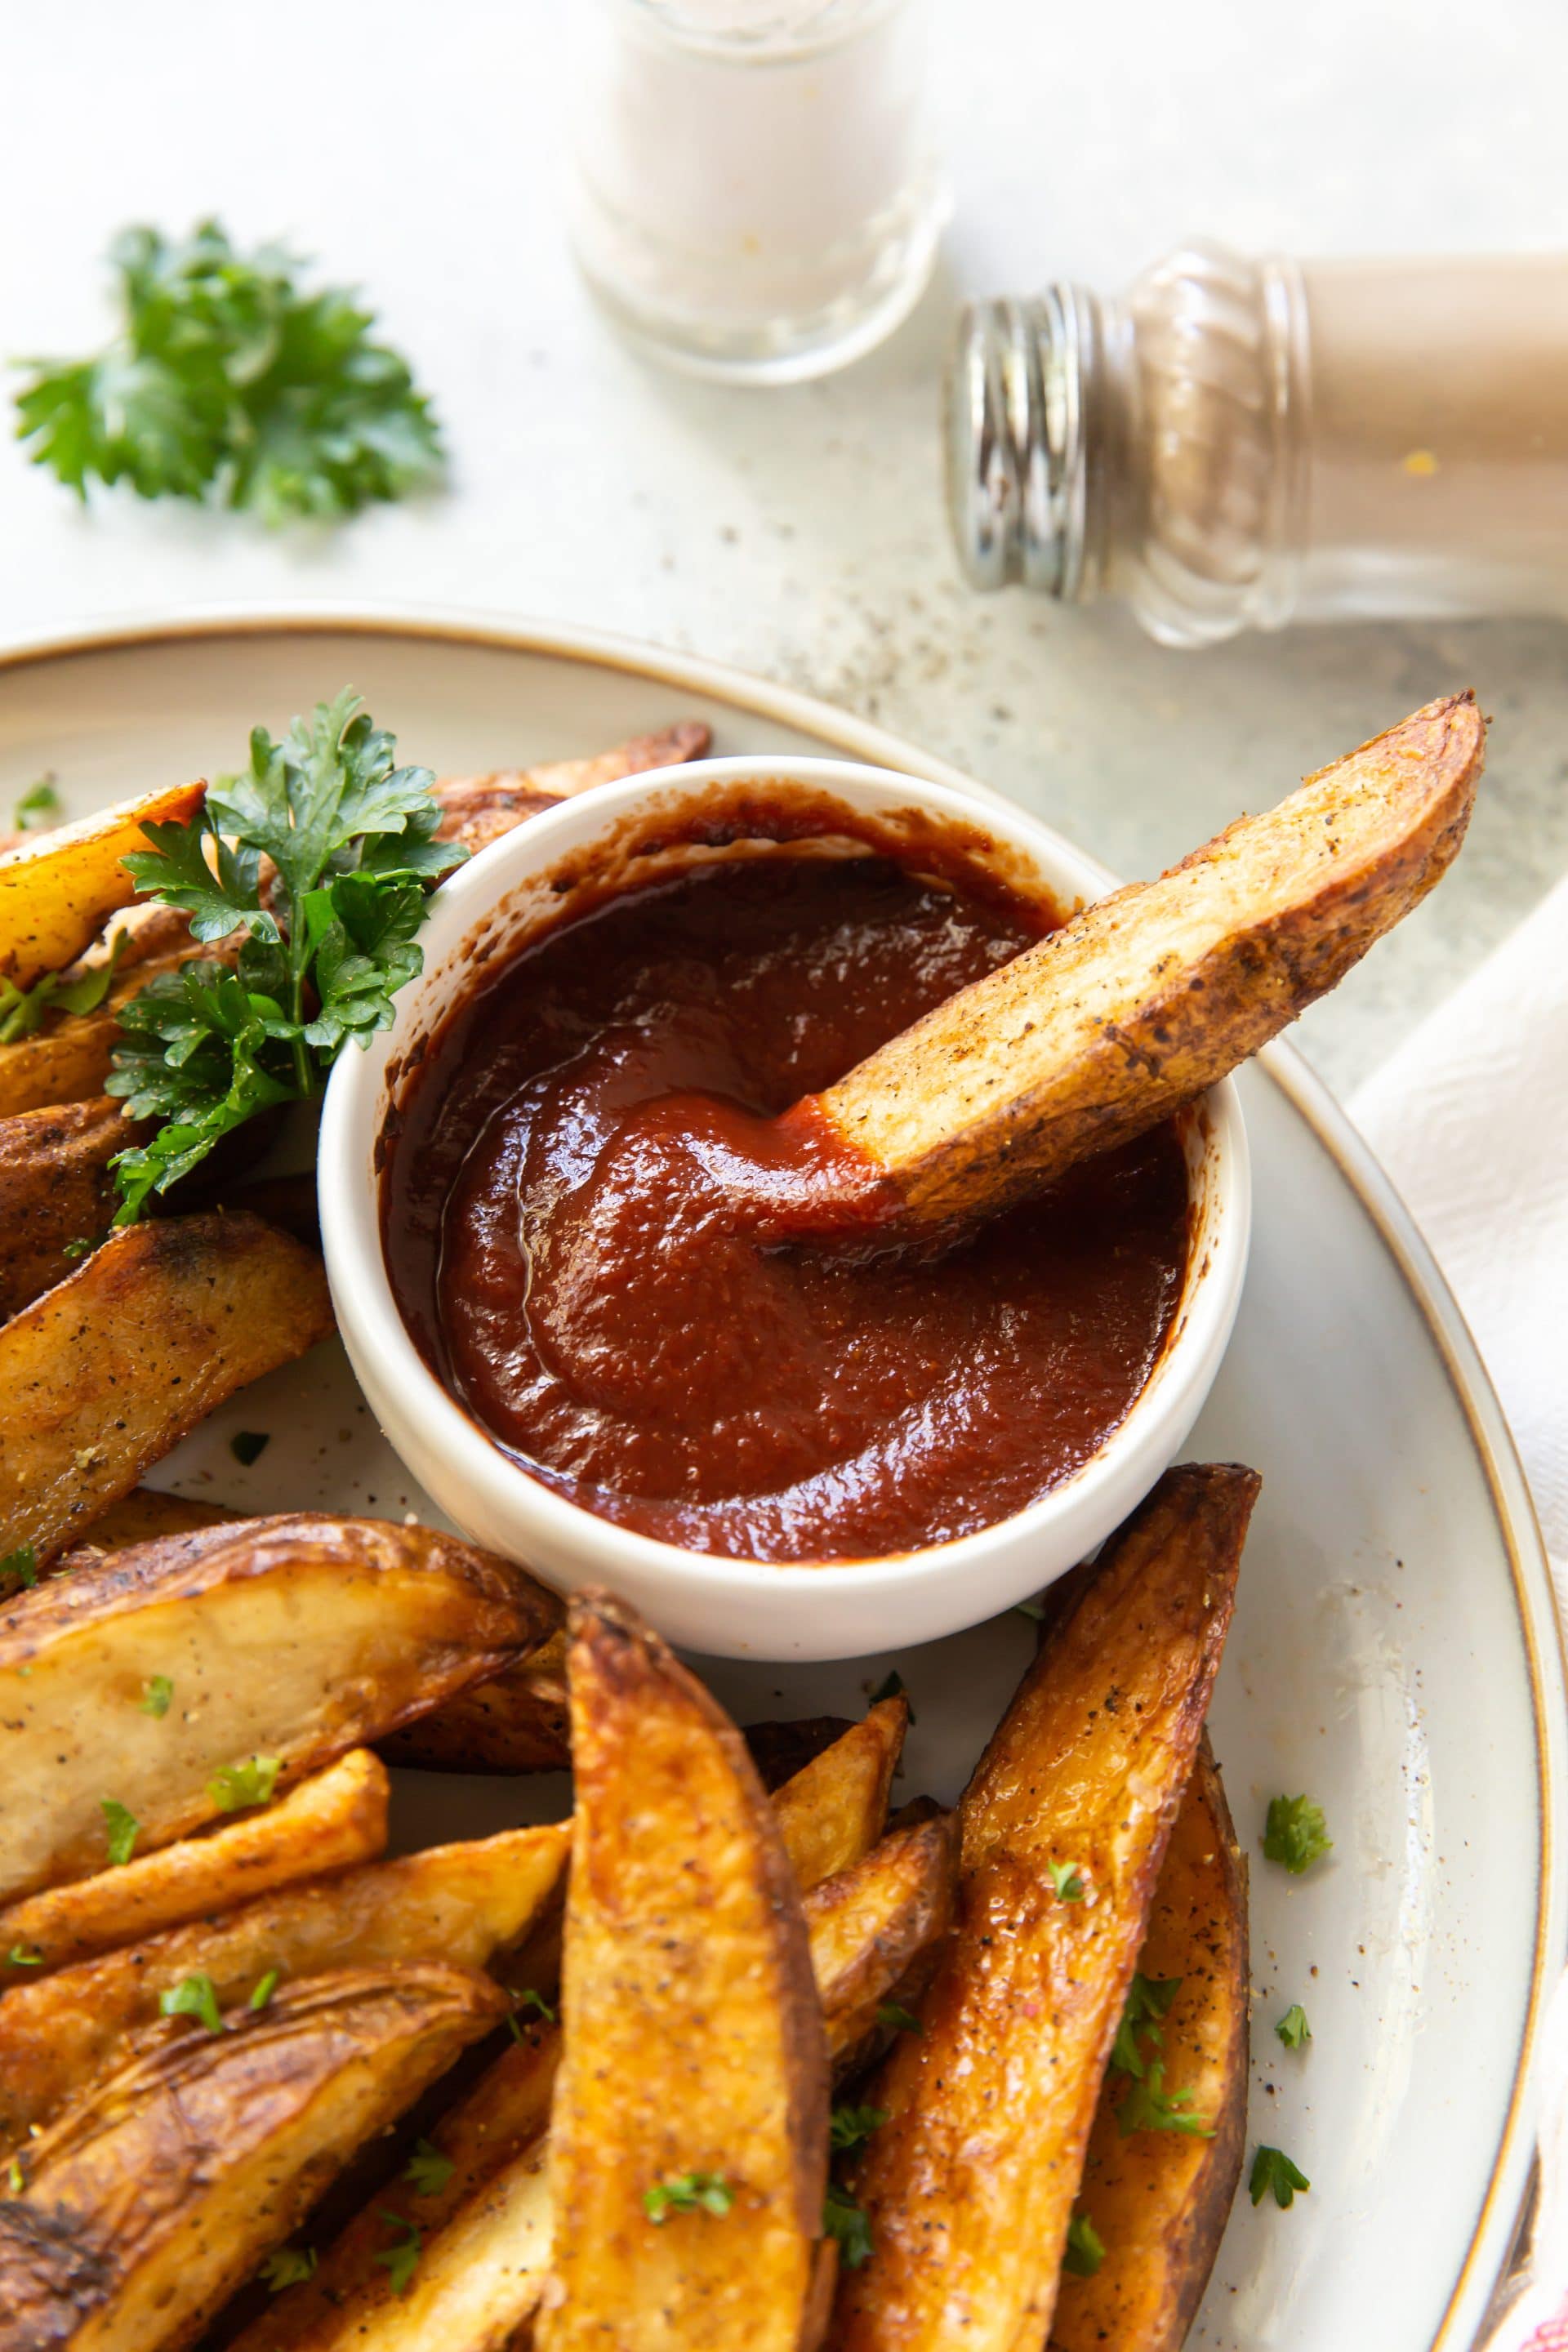 a plate of seasoned, cooked potato wedges with a side cup of ketchup., dipping fry into ketchup